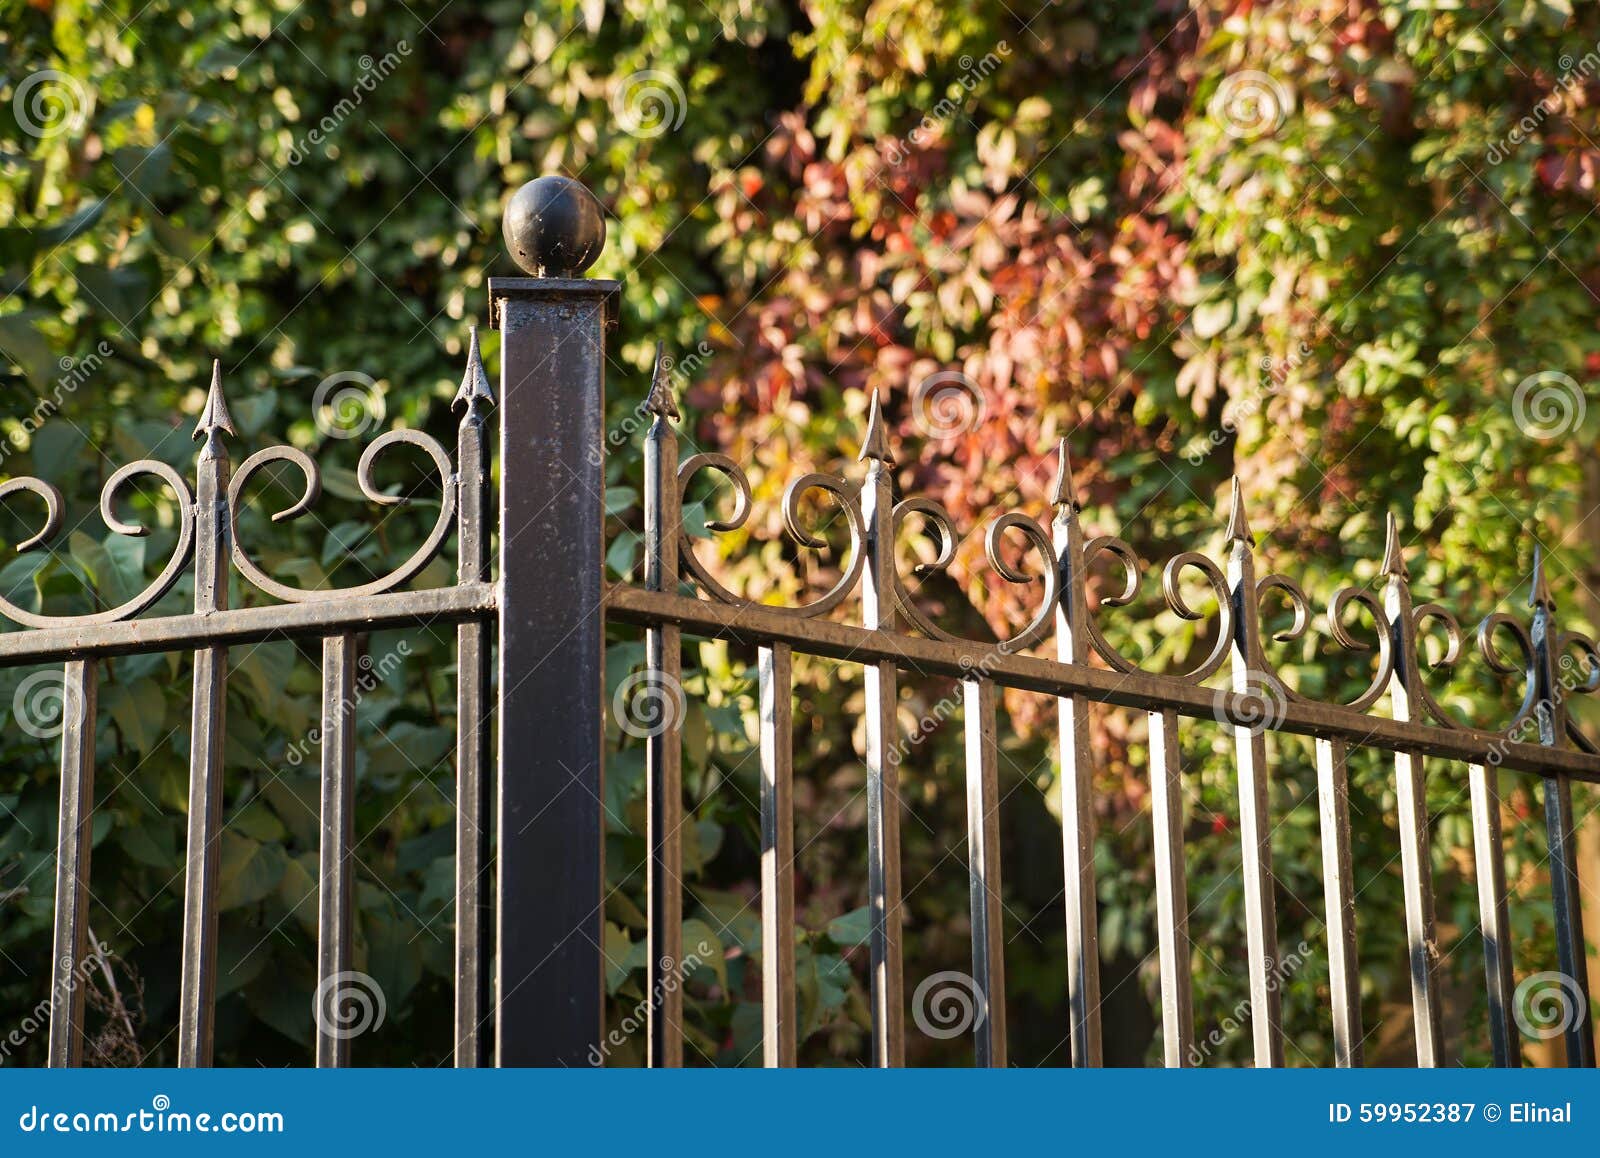 Metal Wrought Fencing, Old Style Stock Image - Image of wrought ...